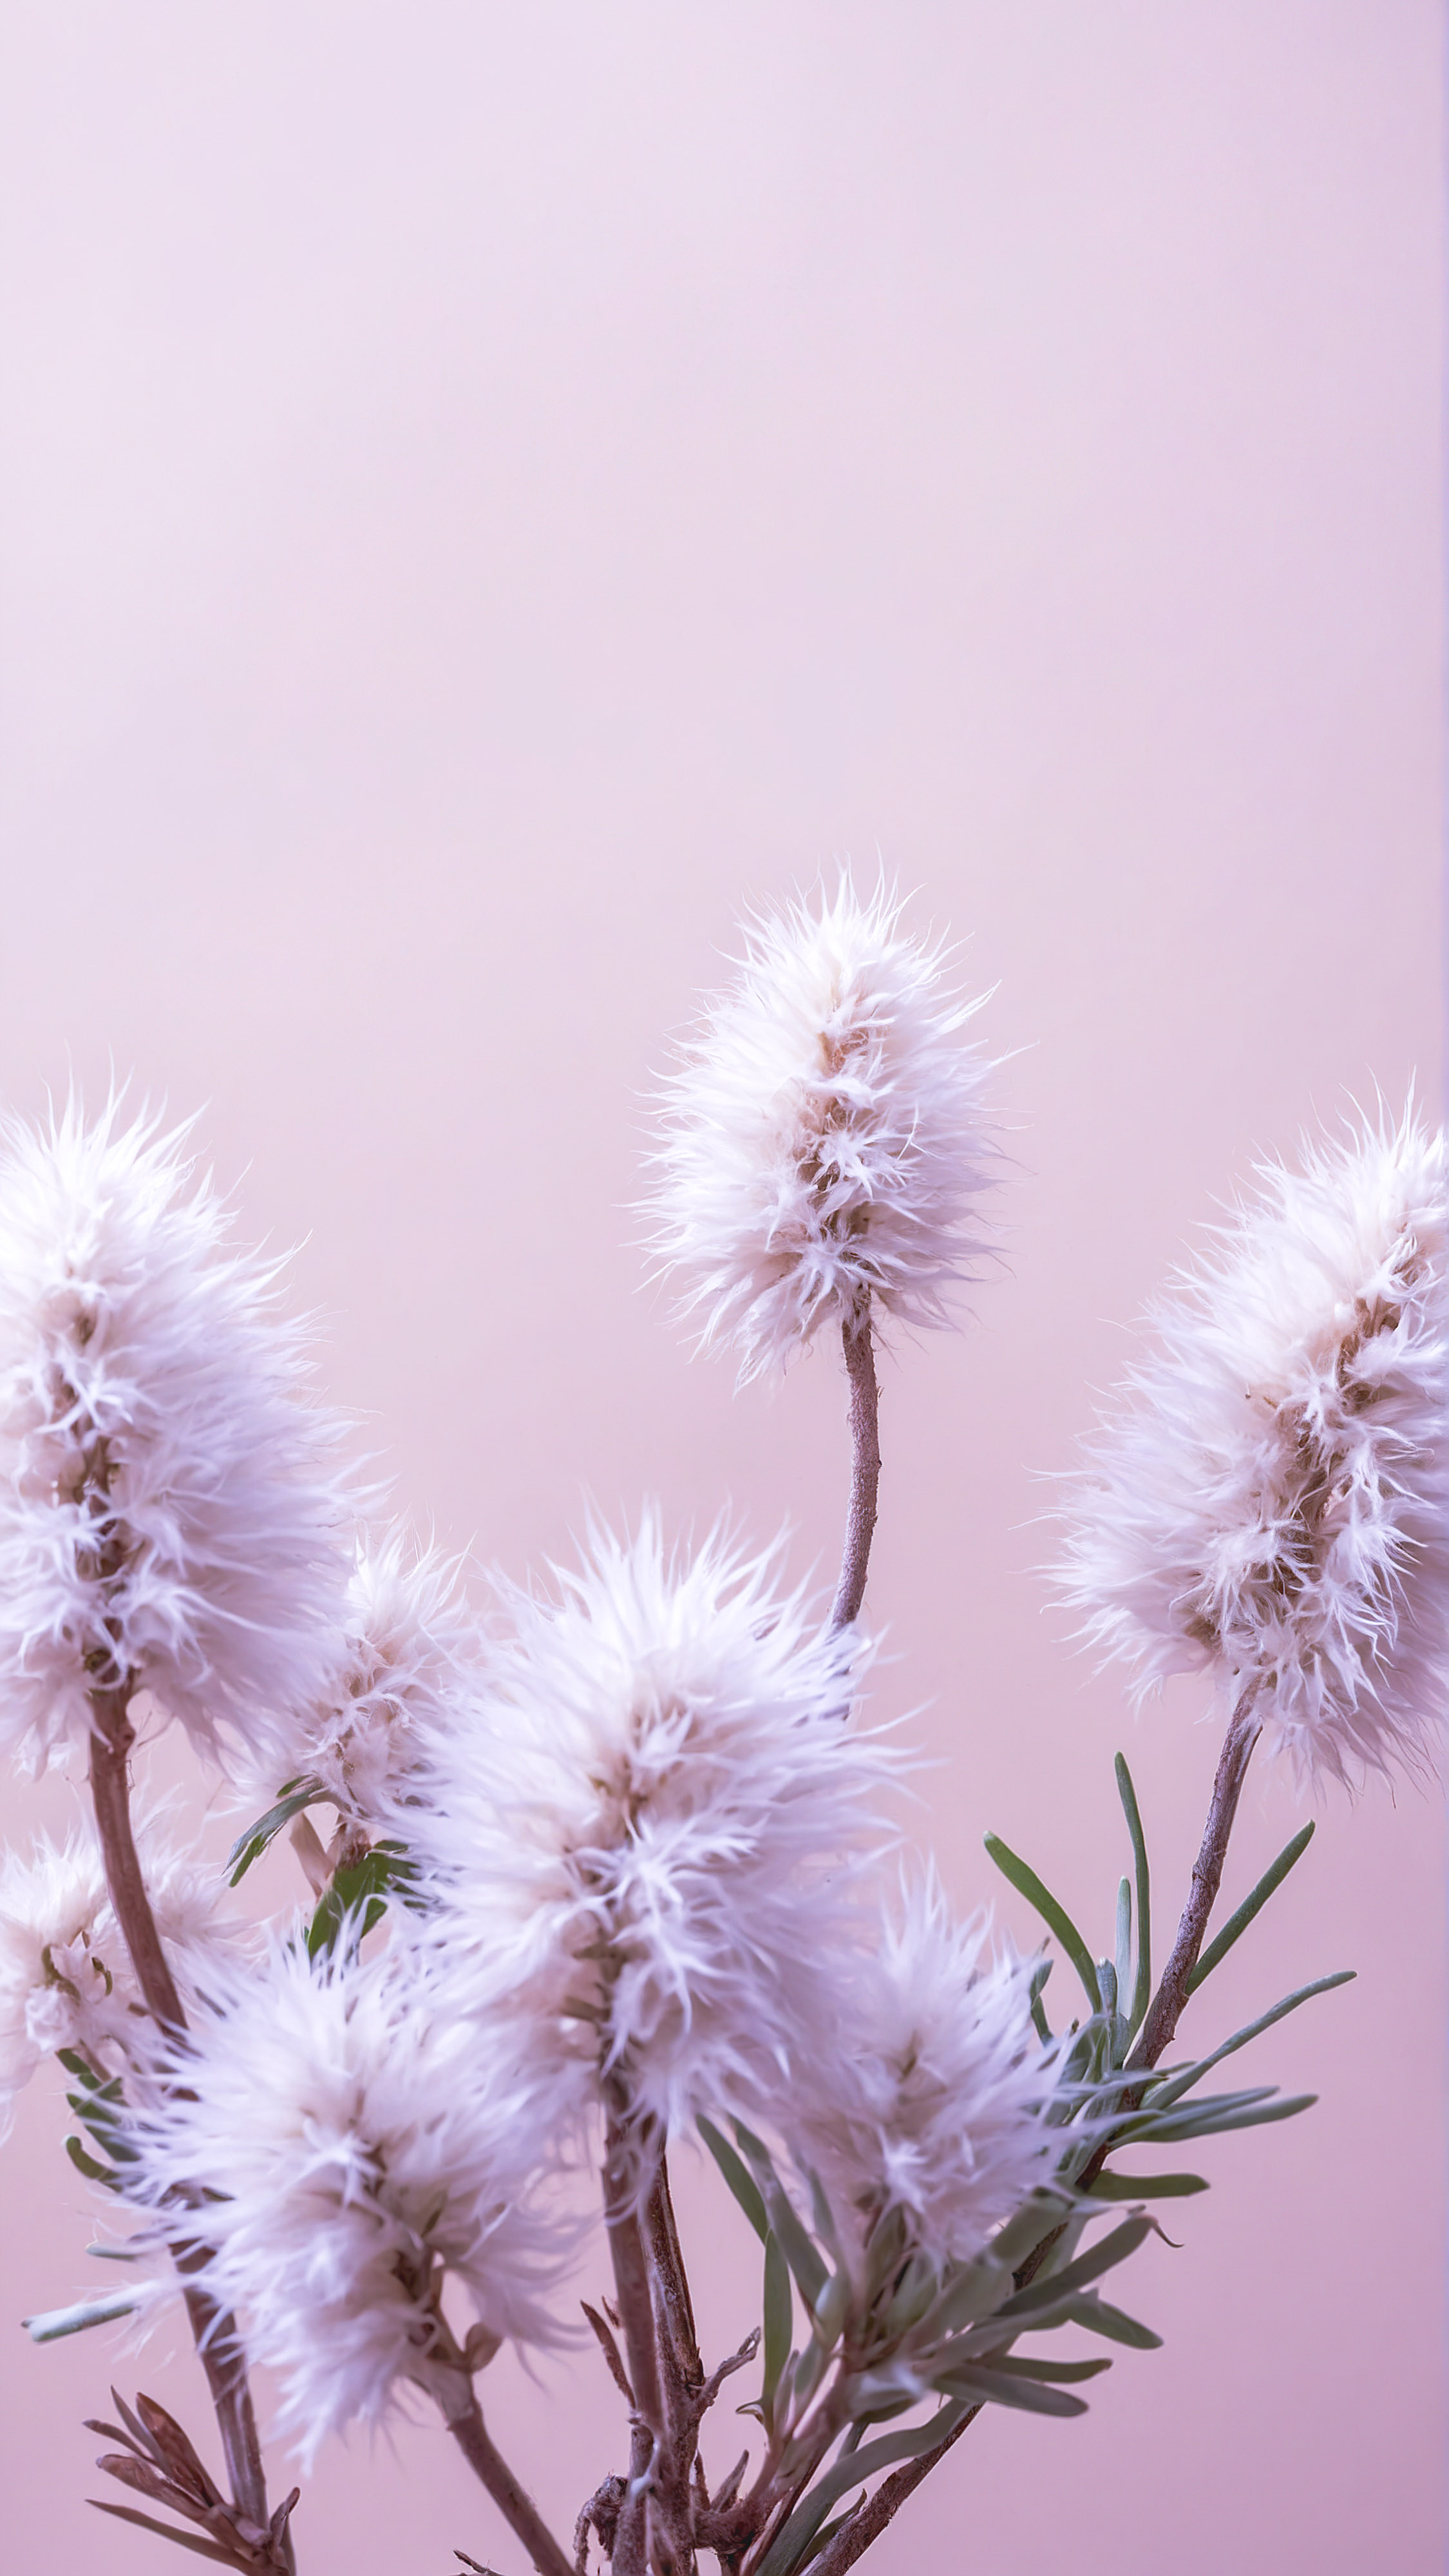 Bring the beauty of nature to your screen with our cute HD wallpaper for iPhone, displaying fluffy, light-colored plants against a soft beige background that exudes tranquility.